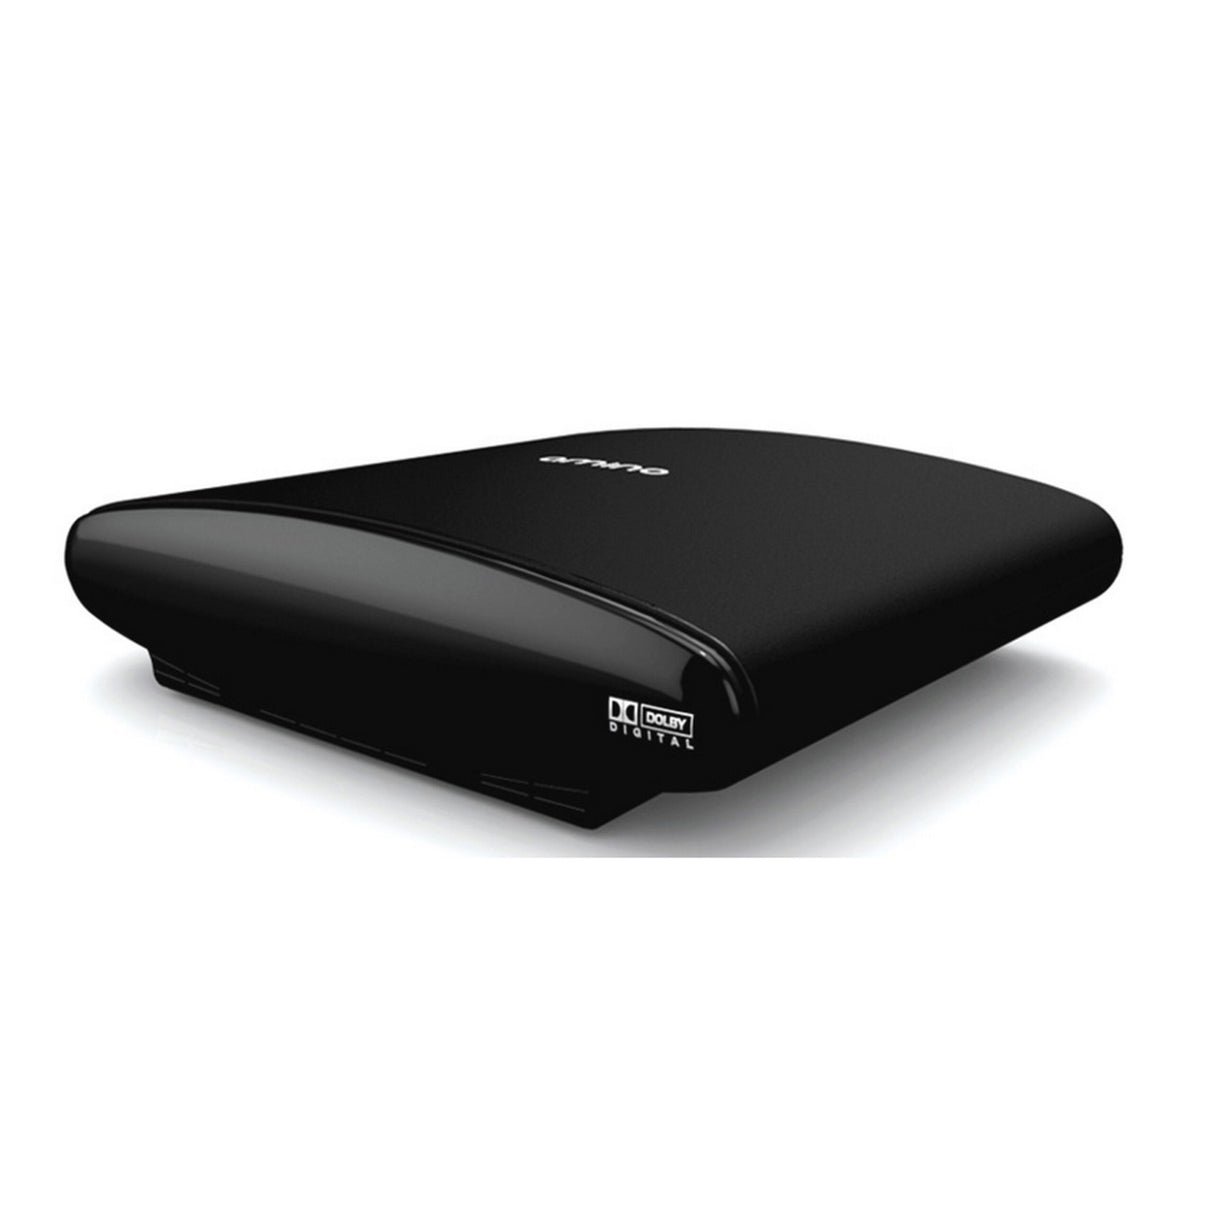 Amino Communications Aminet A540 IPTV/OTT Set-Top Box with Integral PVR and Opera Software